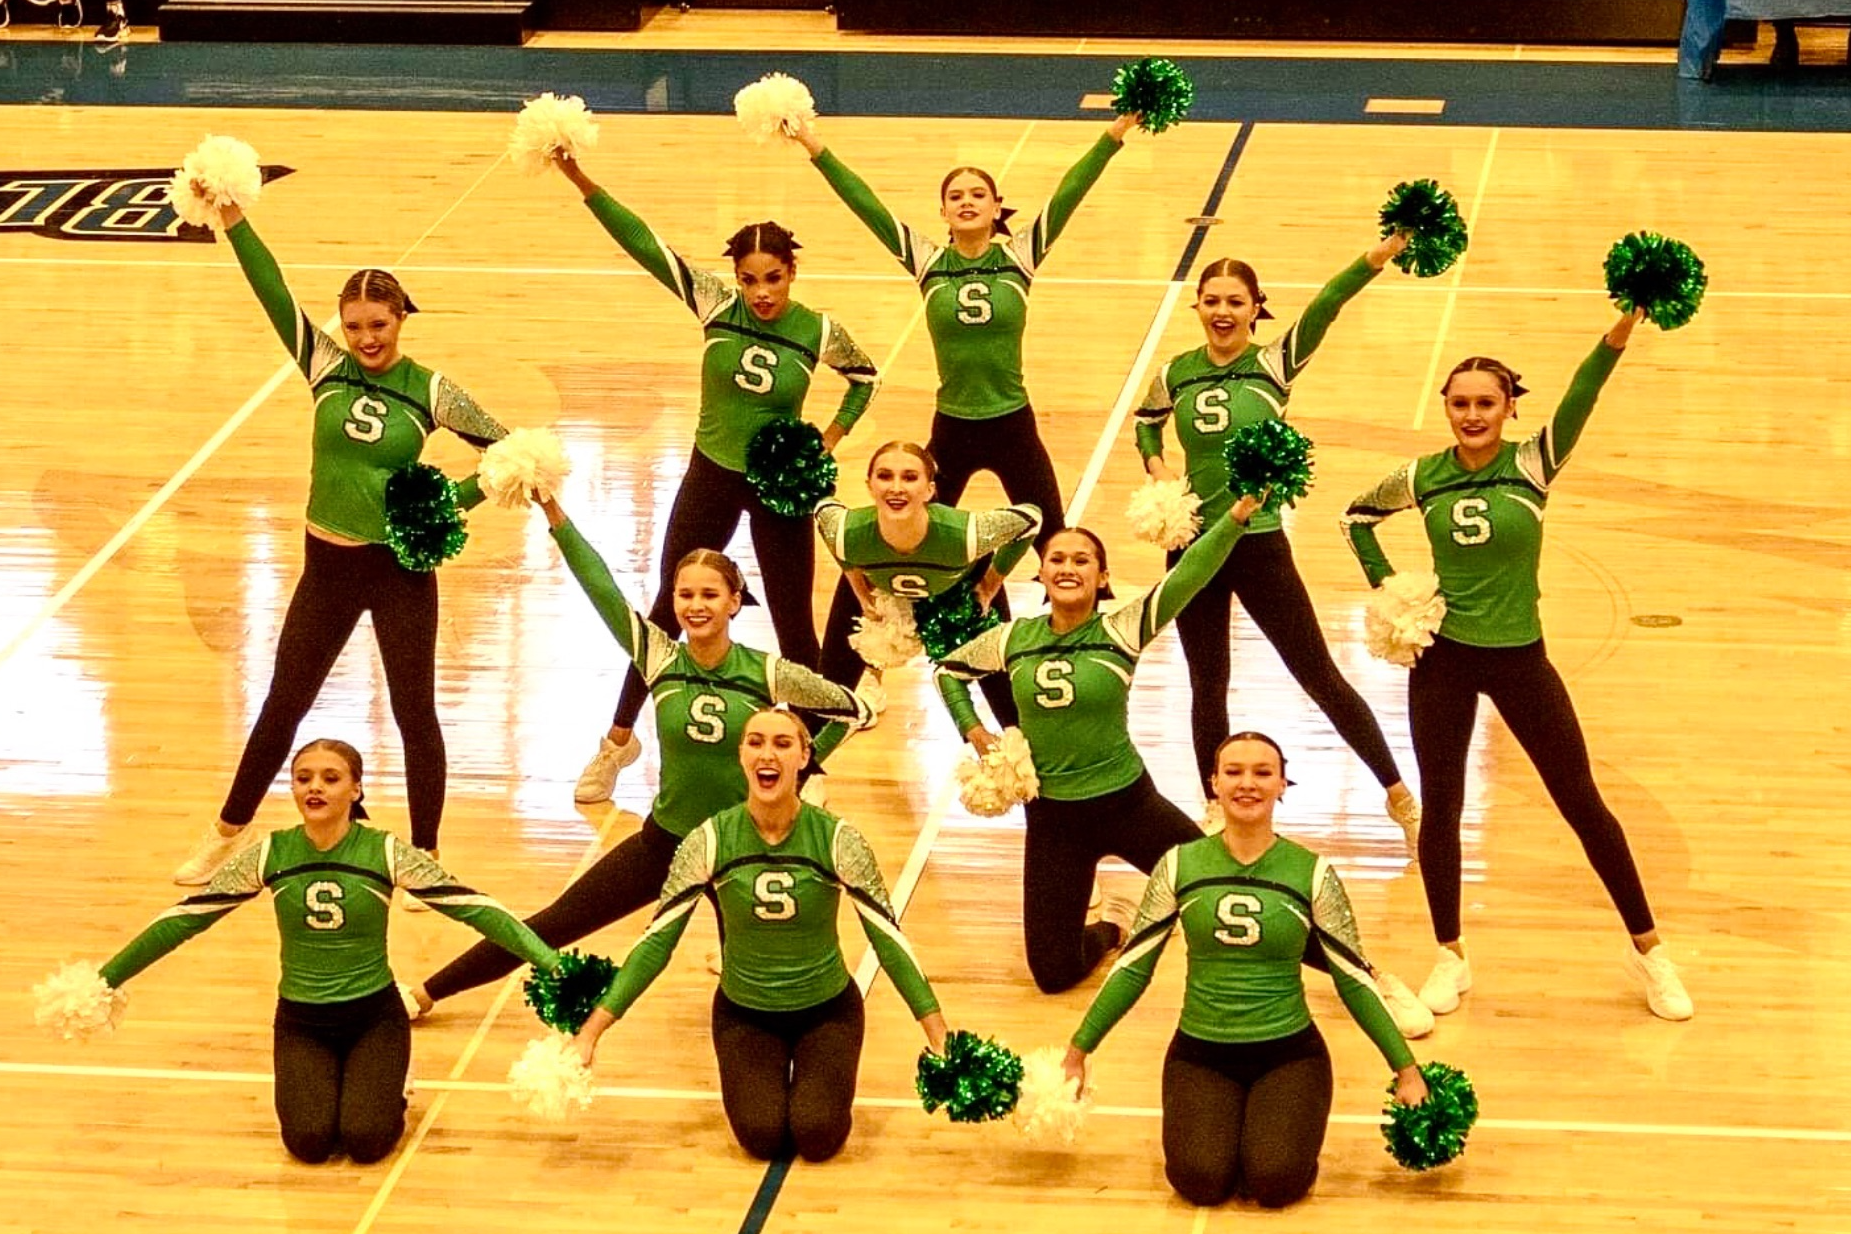 Dazzlers pose at end of performance